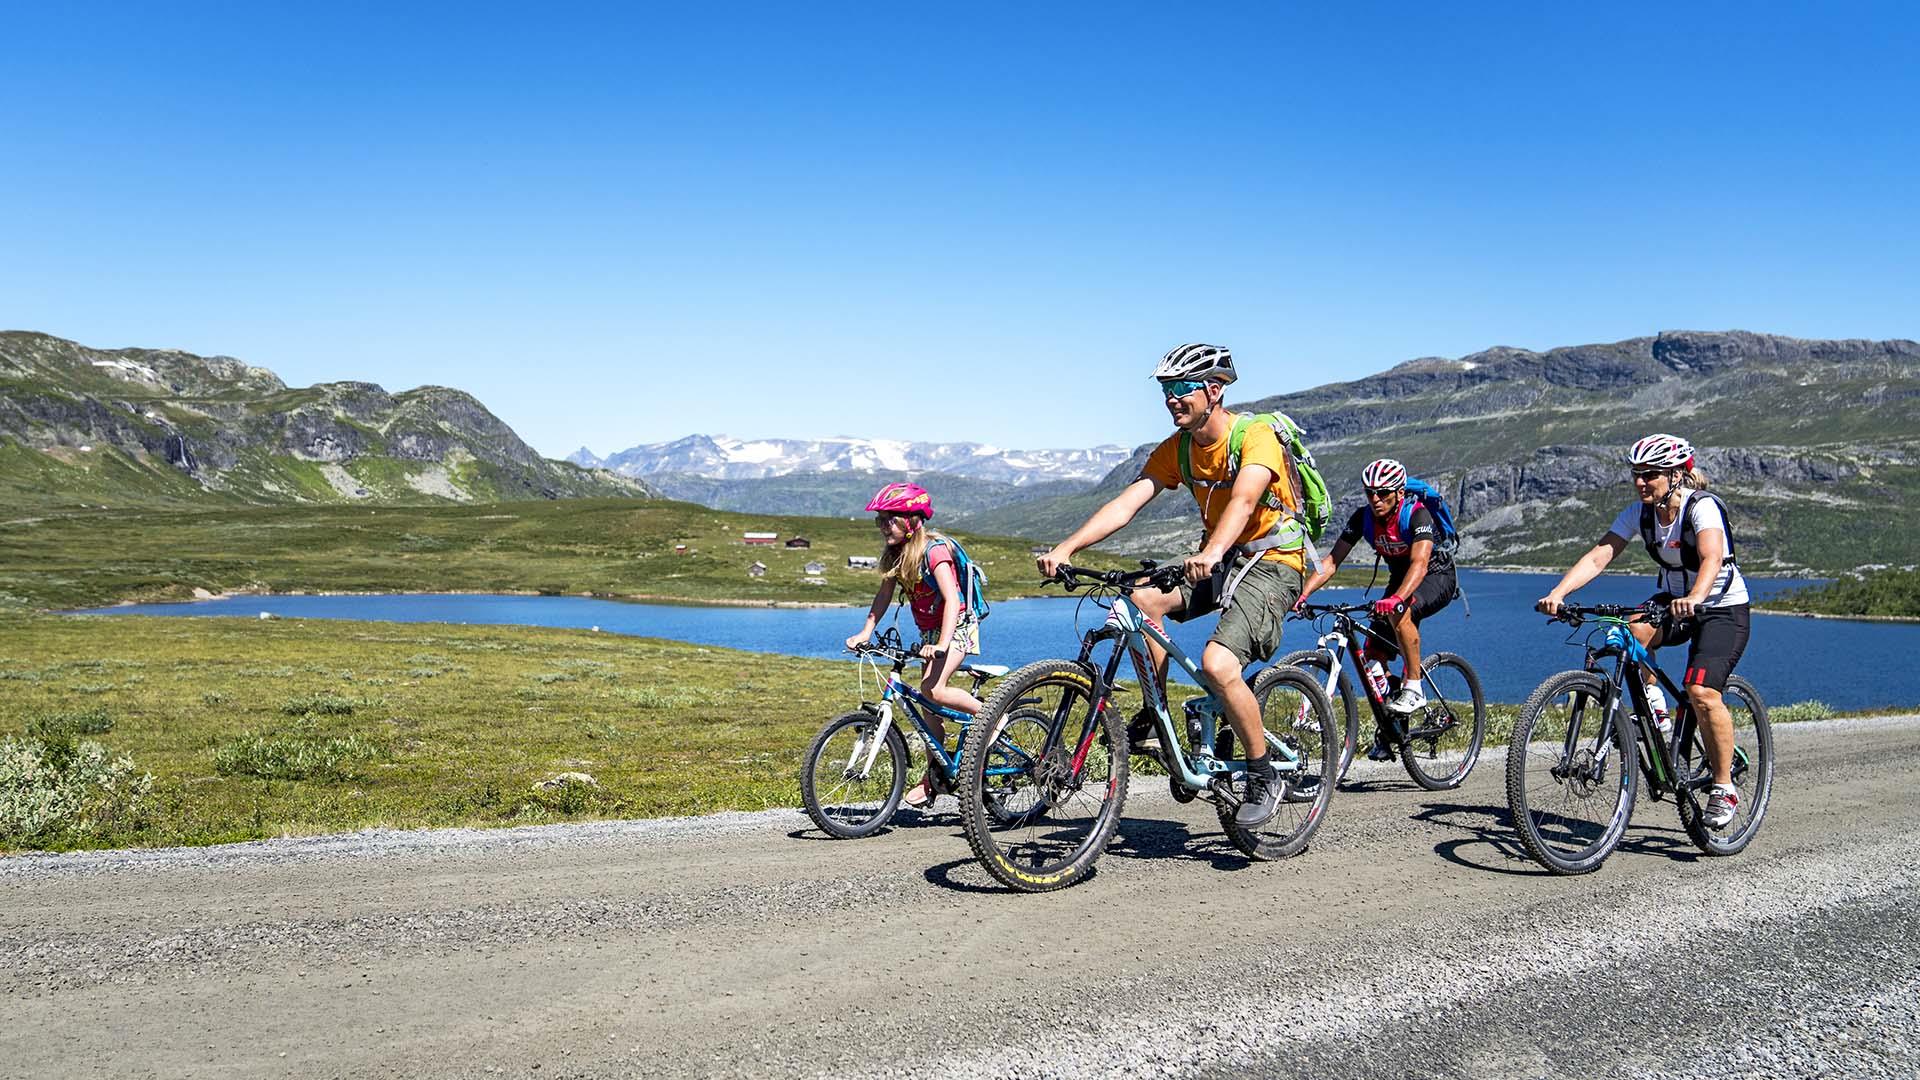 A family on mountain bikes cycles past a mountain lake with high mountains in the distance on a cloudfree summer's day.